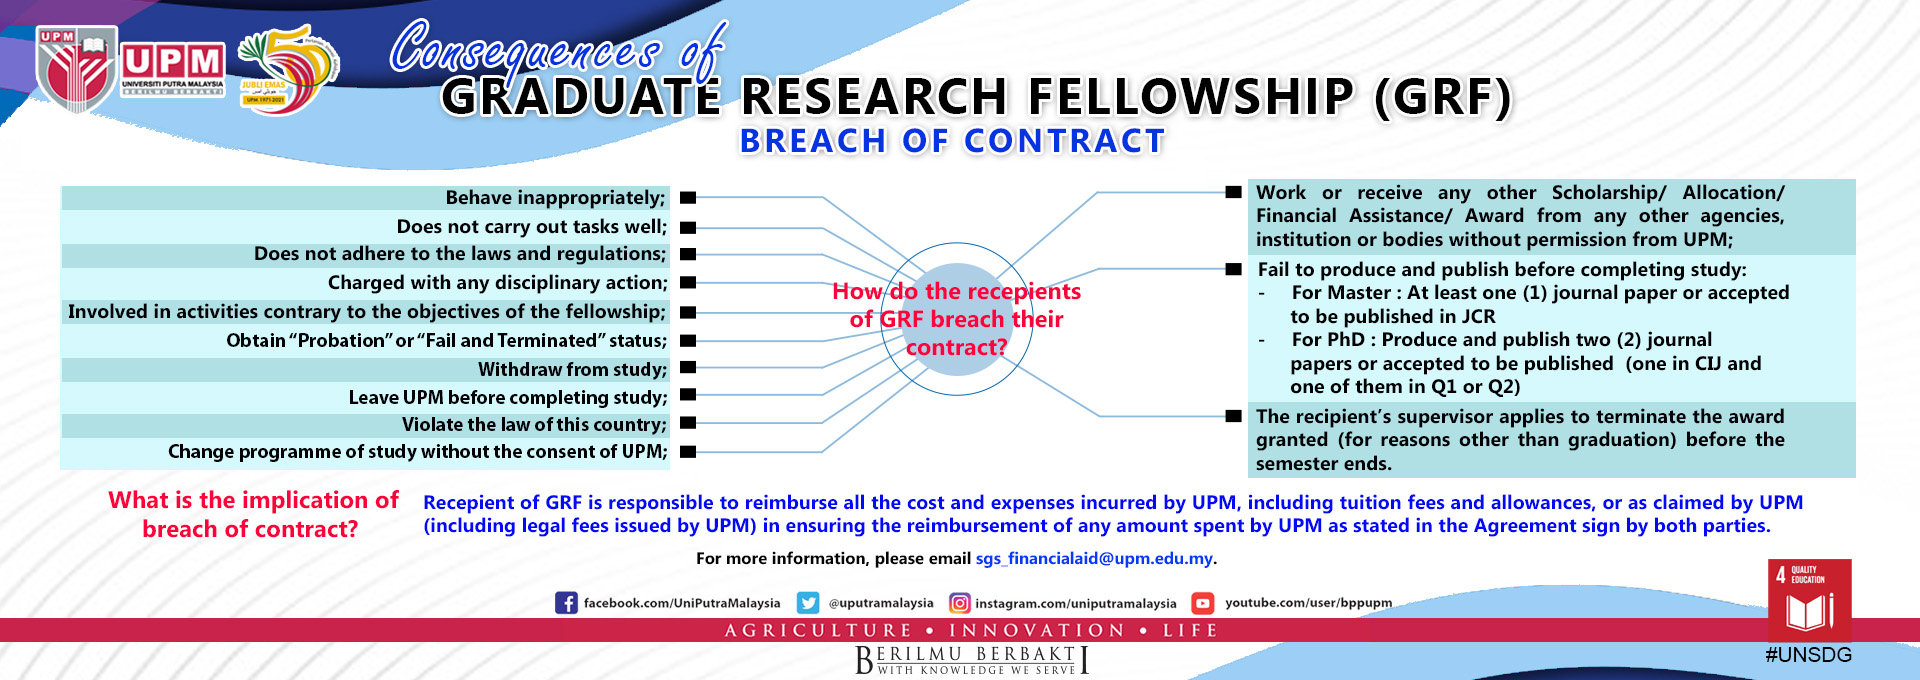 Breach of Contract GRF